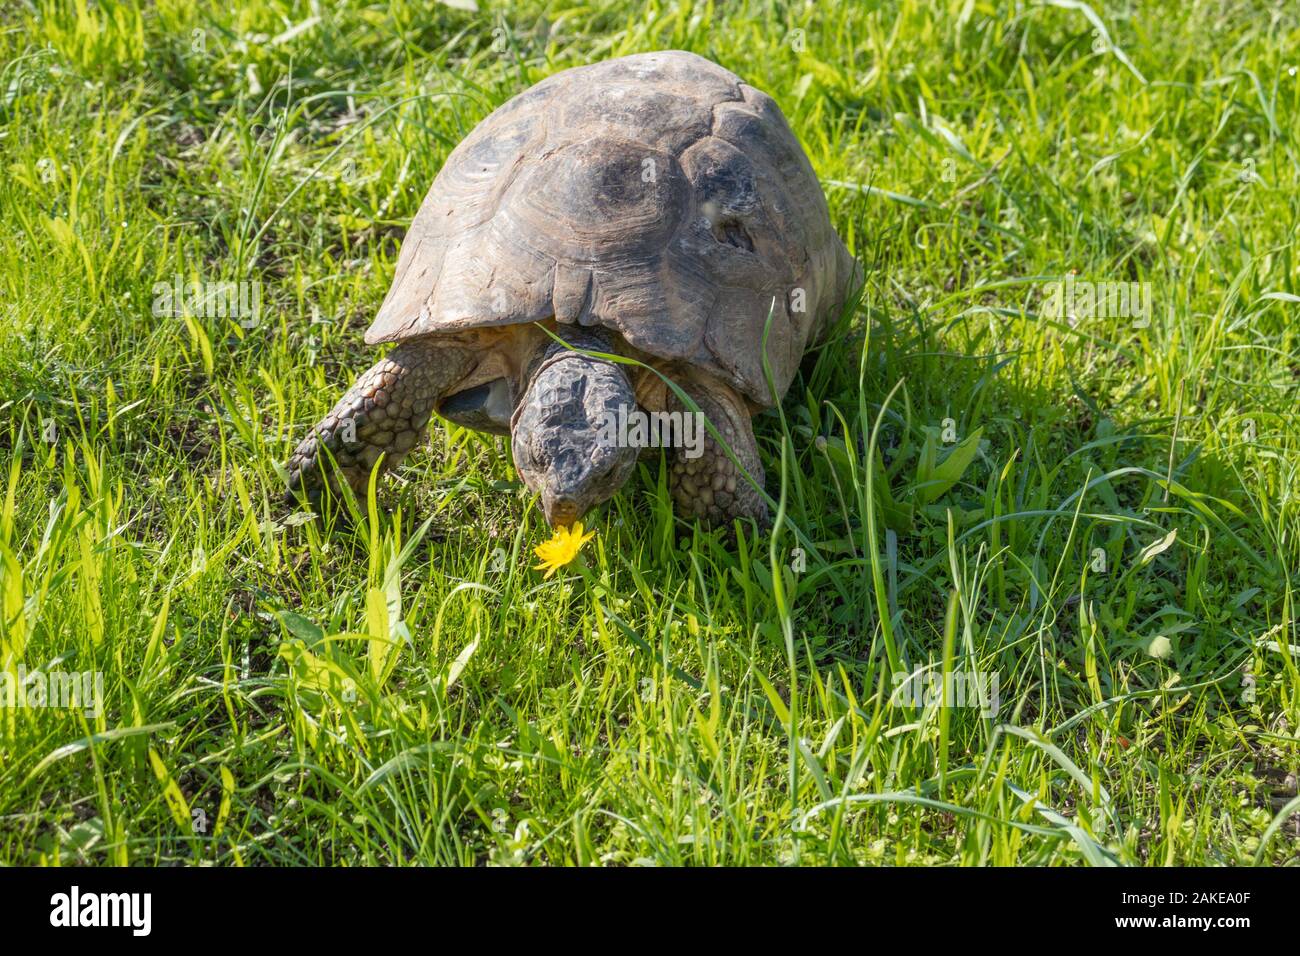 Turtle in Athens, Greece, on the sights of Acropolis monument on green grass Stock Photo